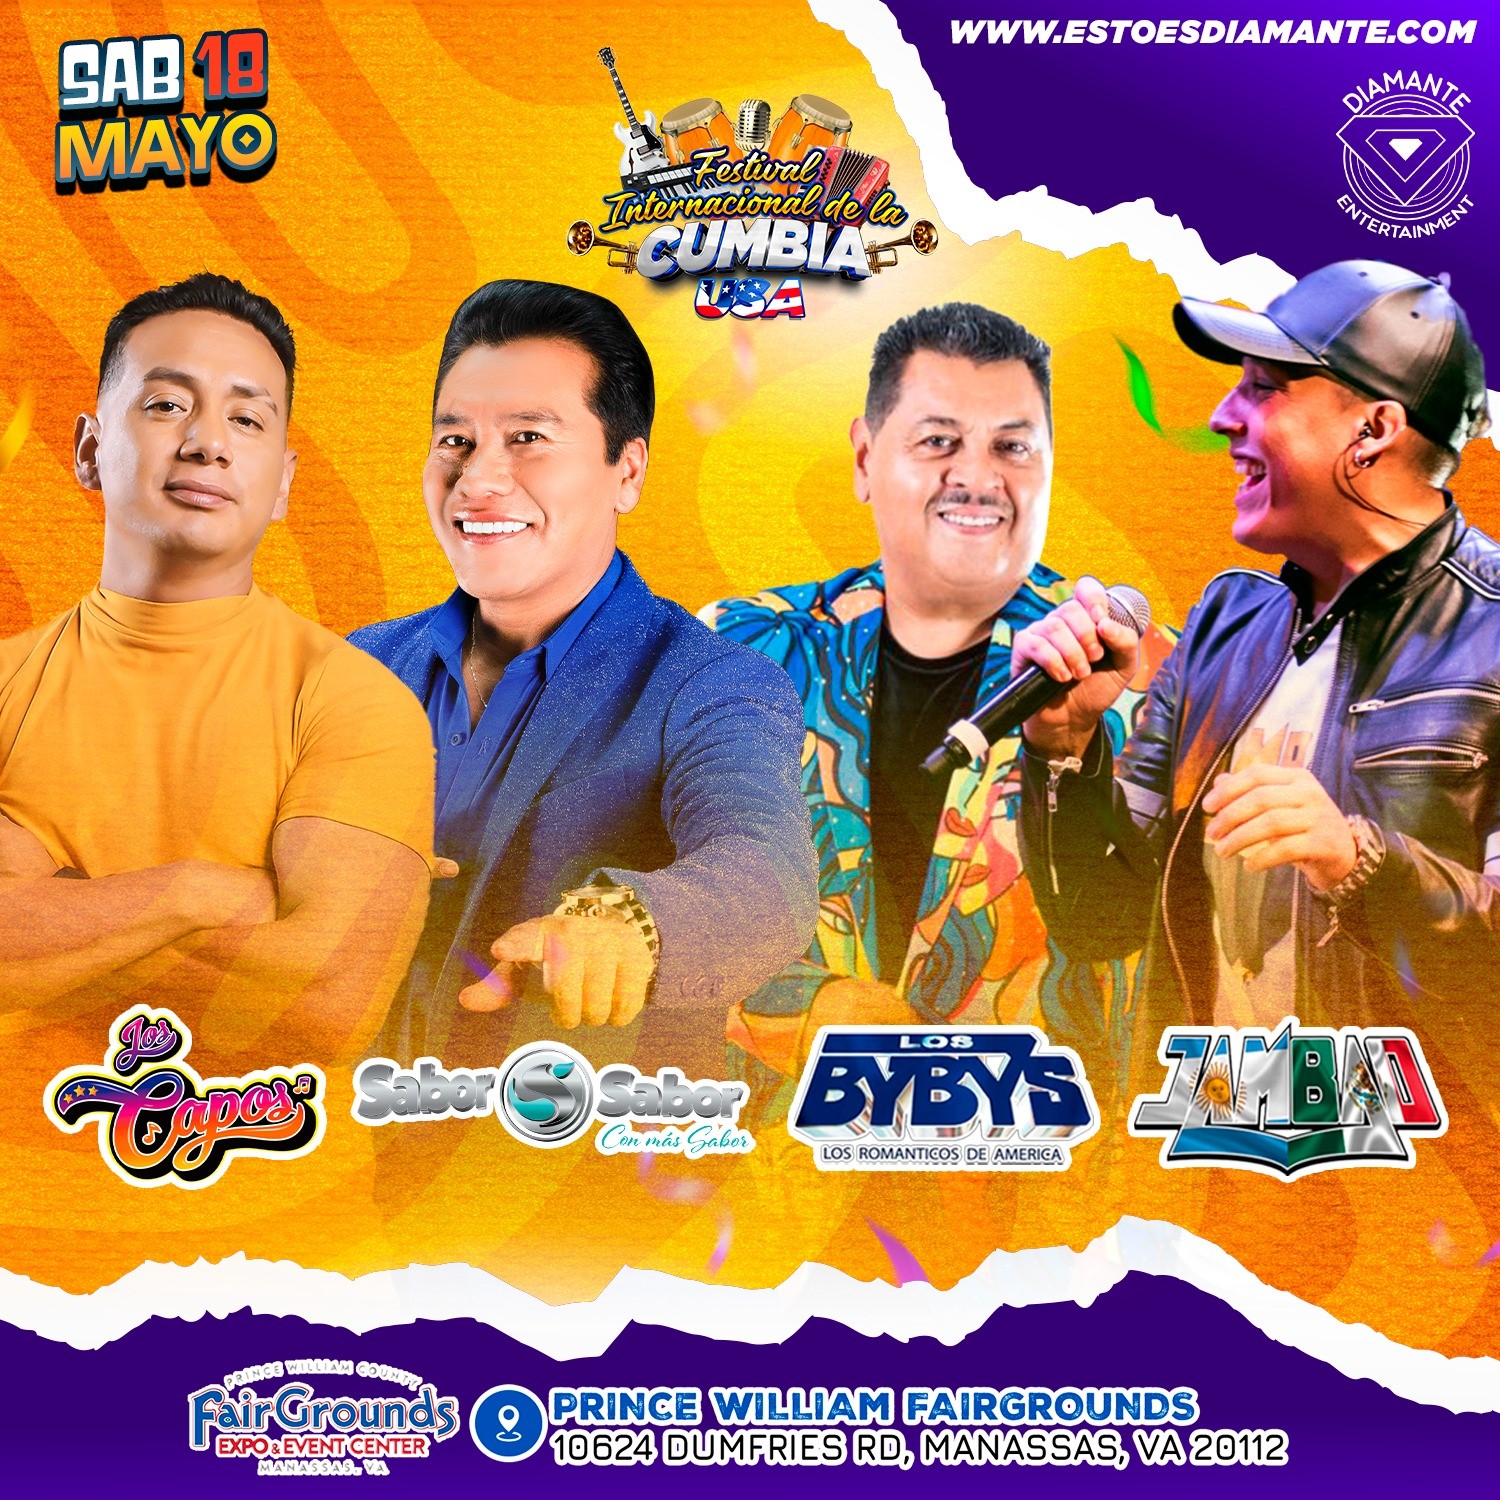 Festival Internacional de la Cumbia USA  on May 18, 13:00@PRINCE WILLIAM COUNTY FAIRGROUNDS - Buy tickets and Get information on Diamante Entertainment 